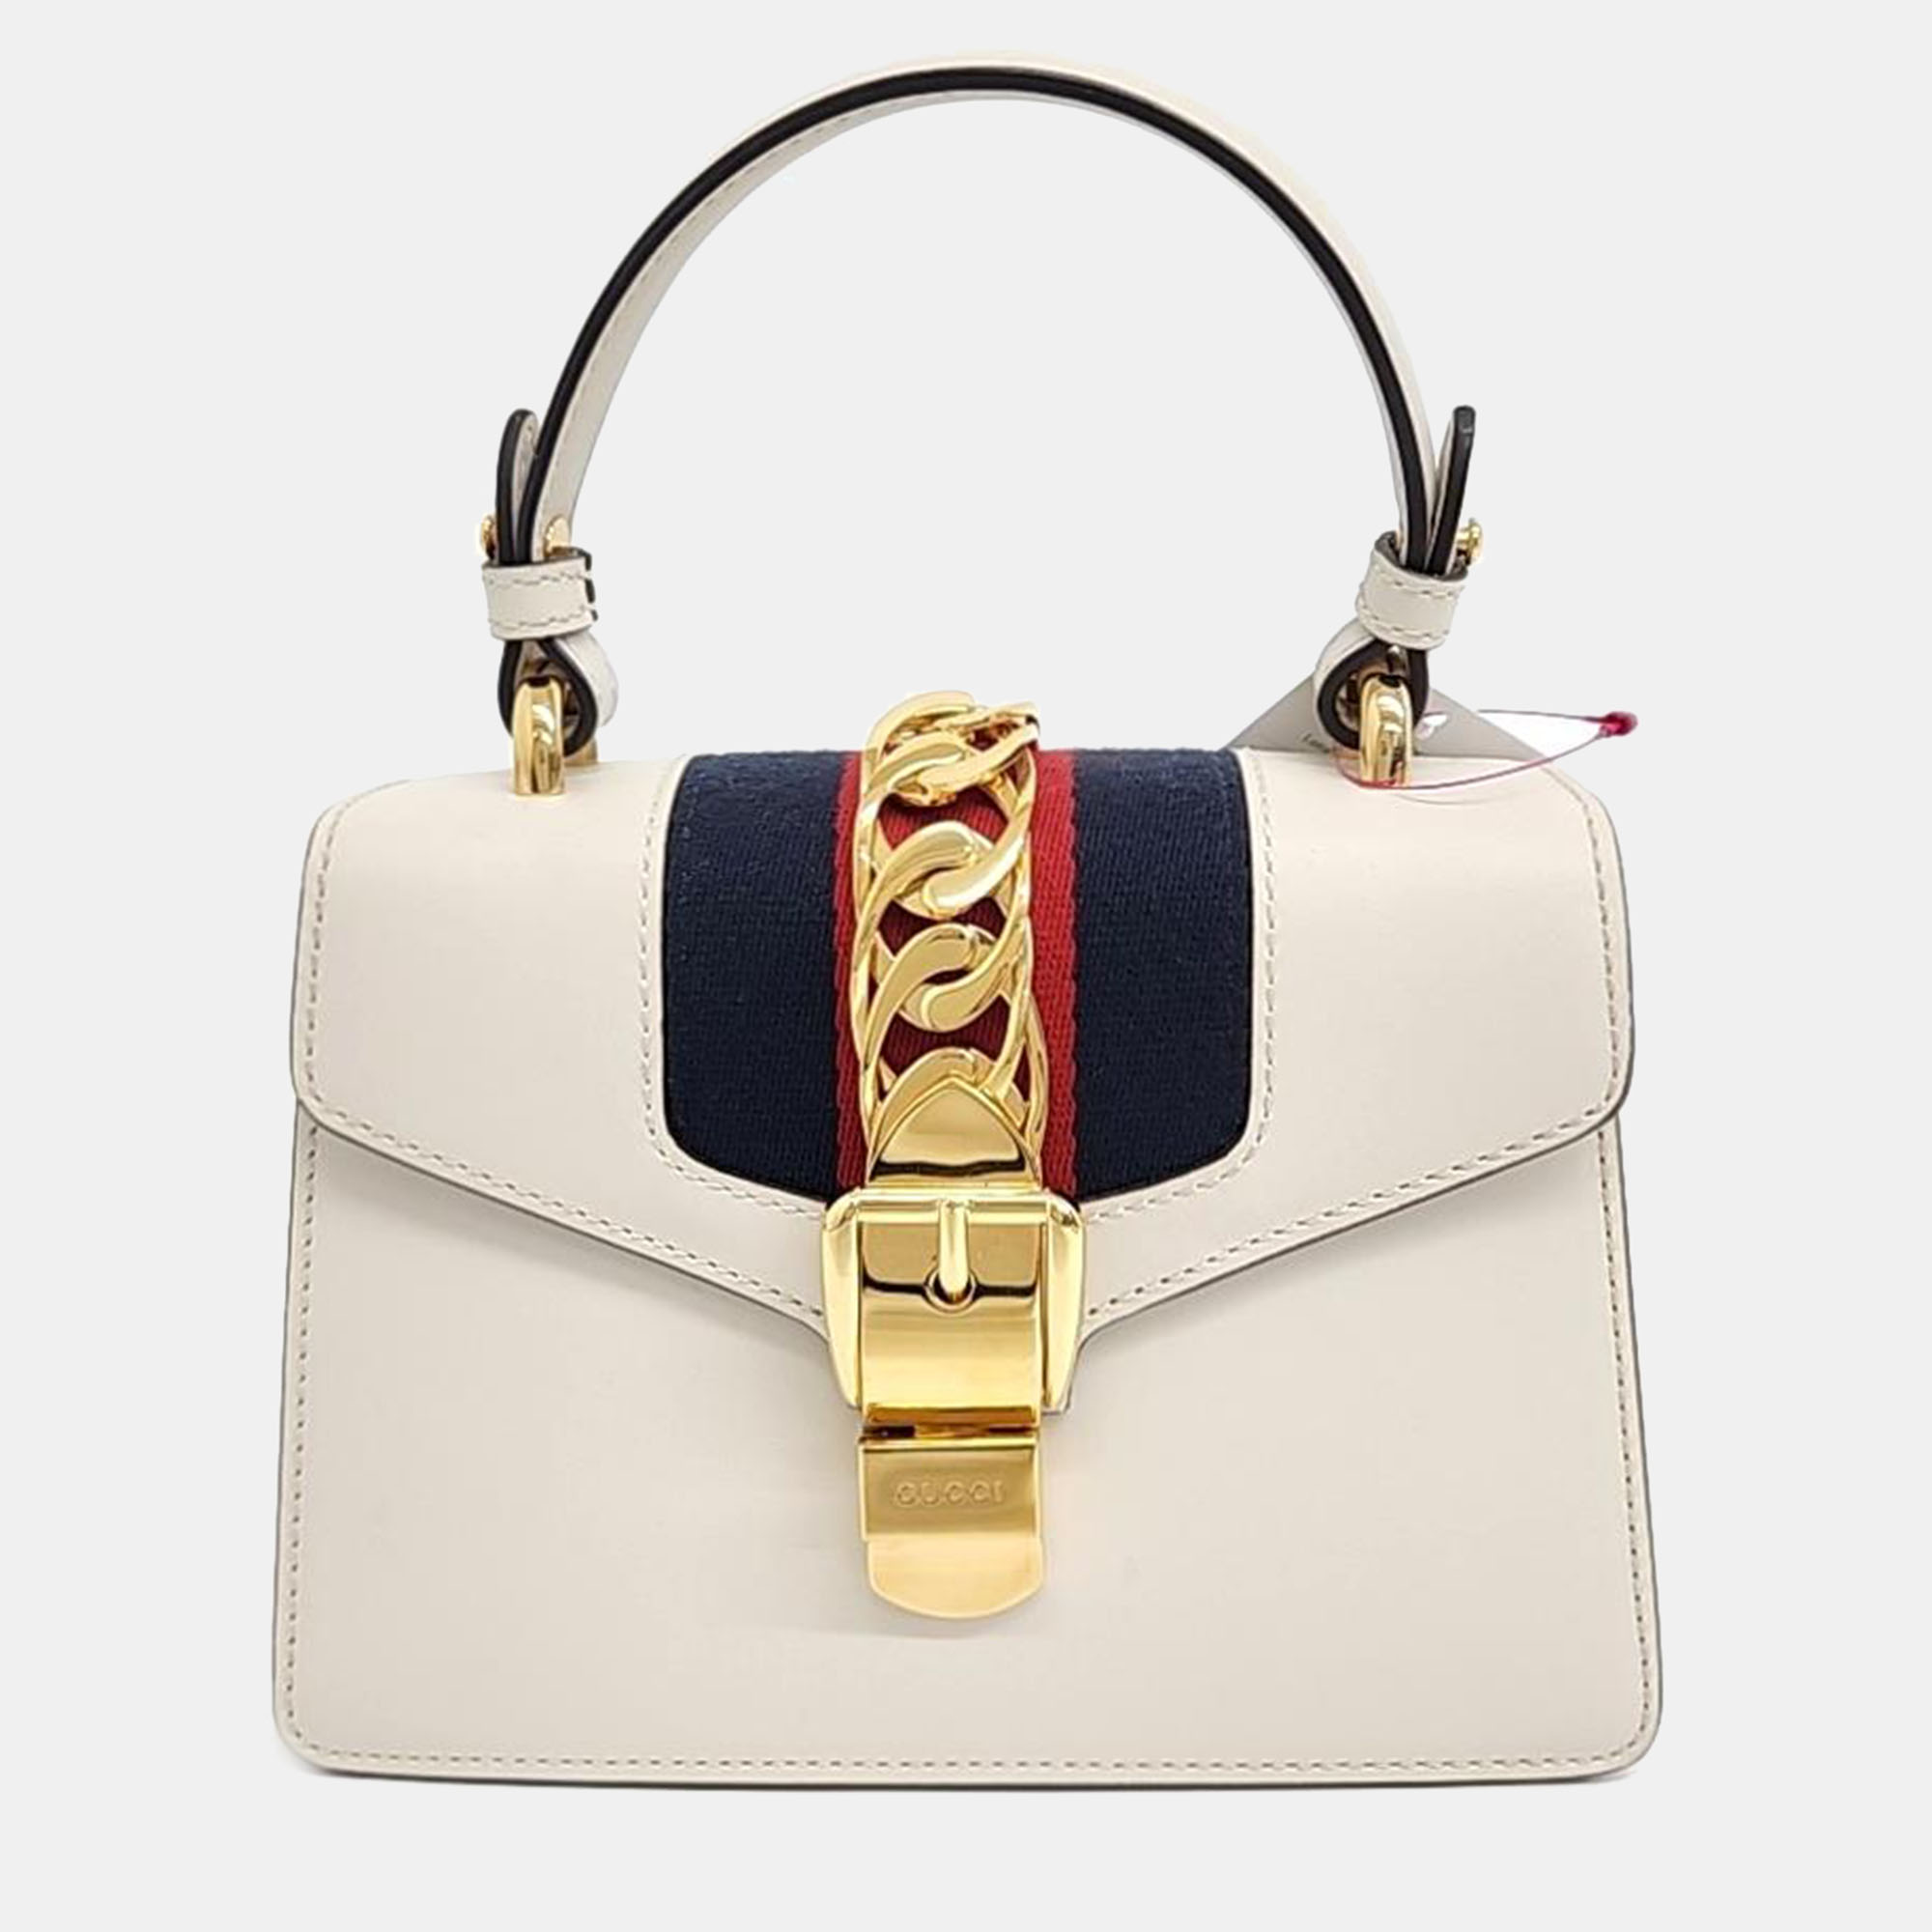 Gucci ivory leather sylvie mini tote bag